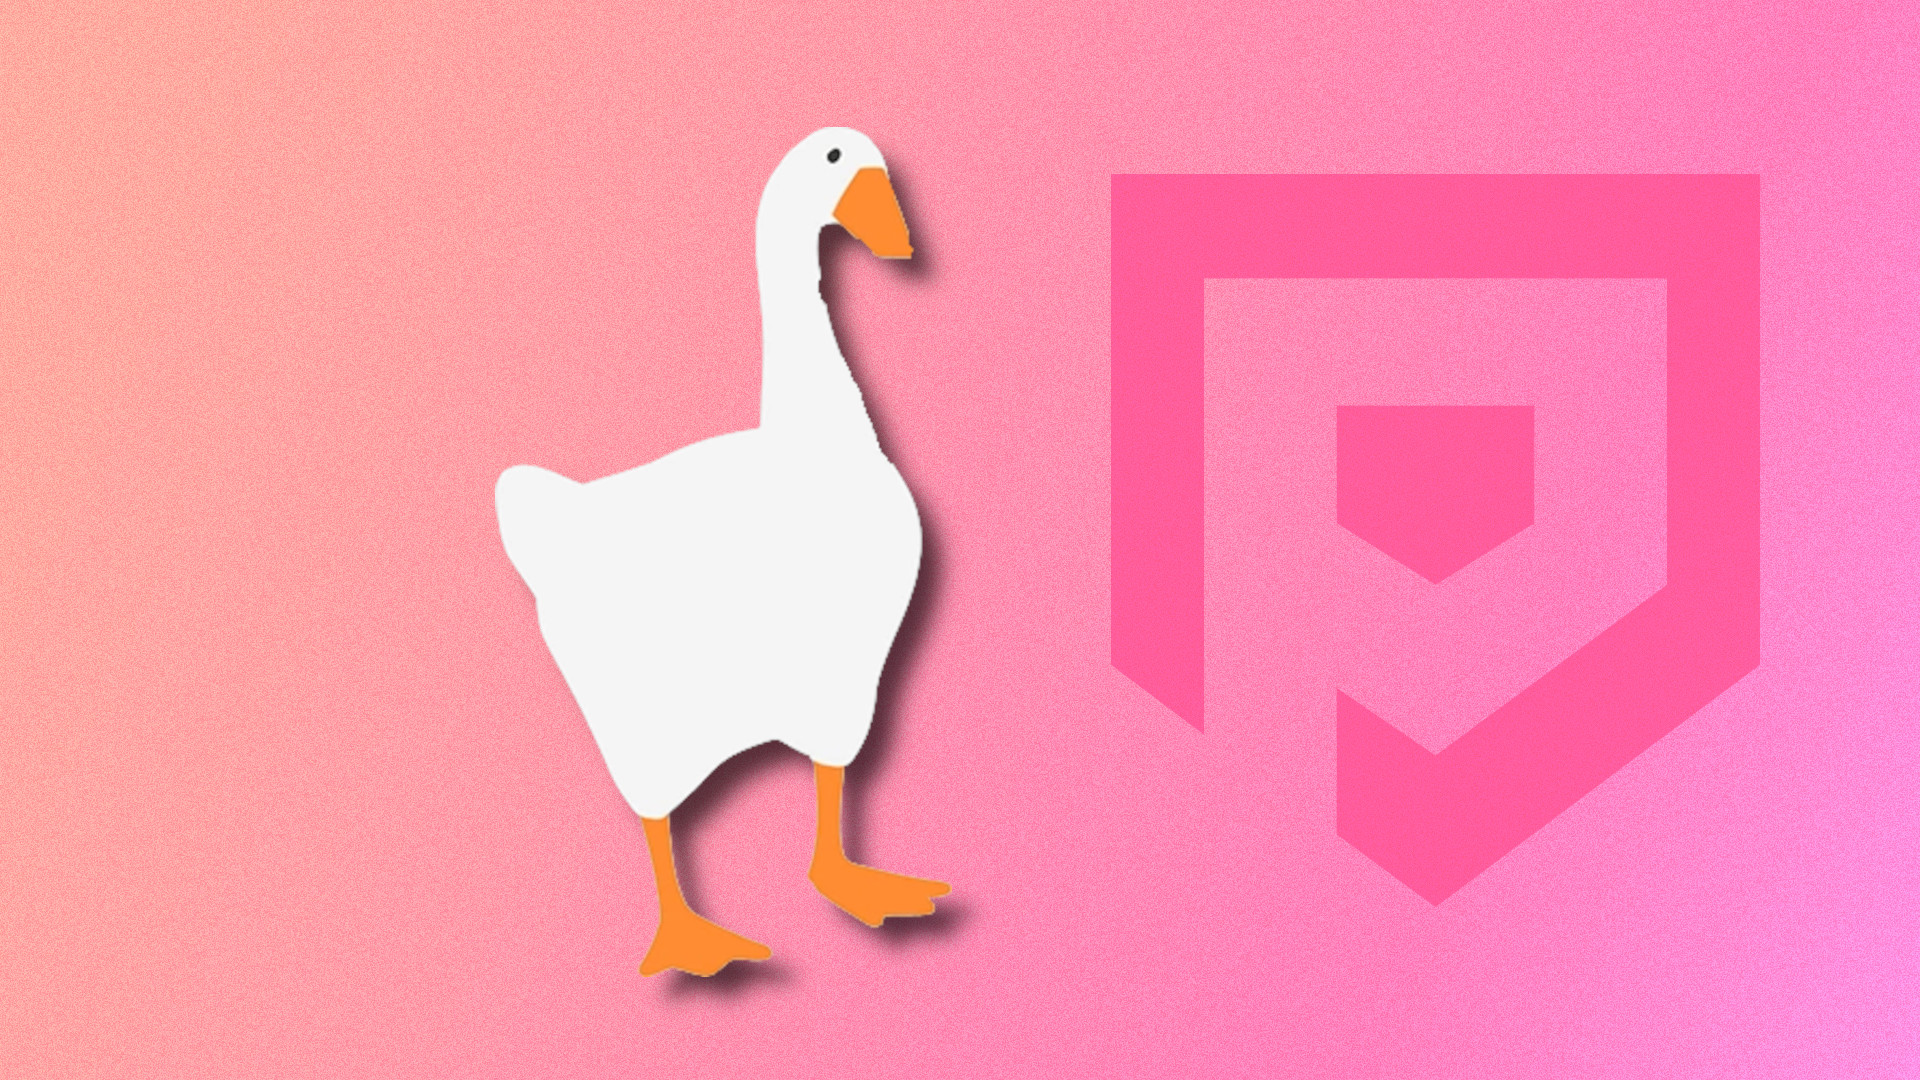 Spectacular Untitled Goose Game could be coming to mobile